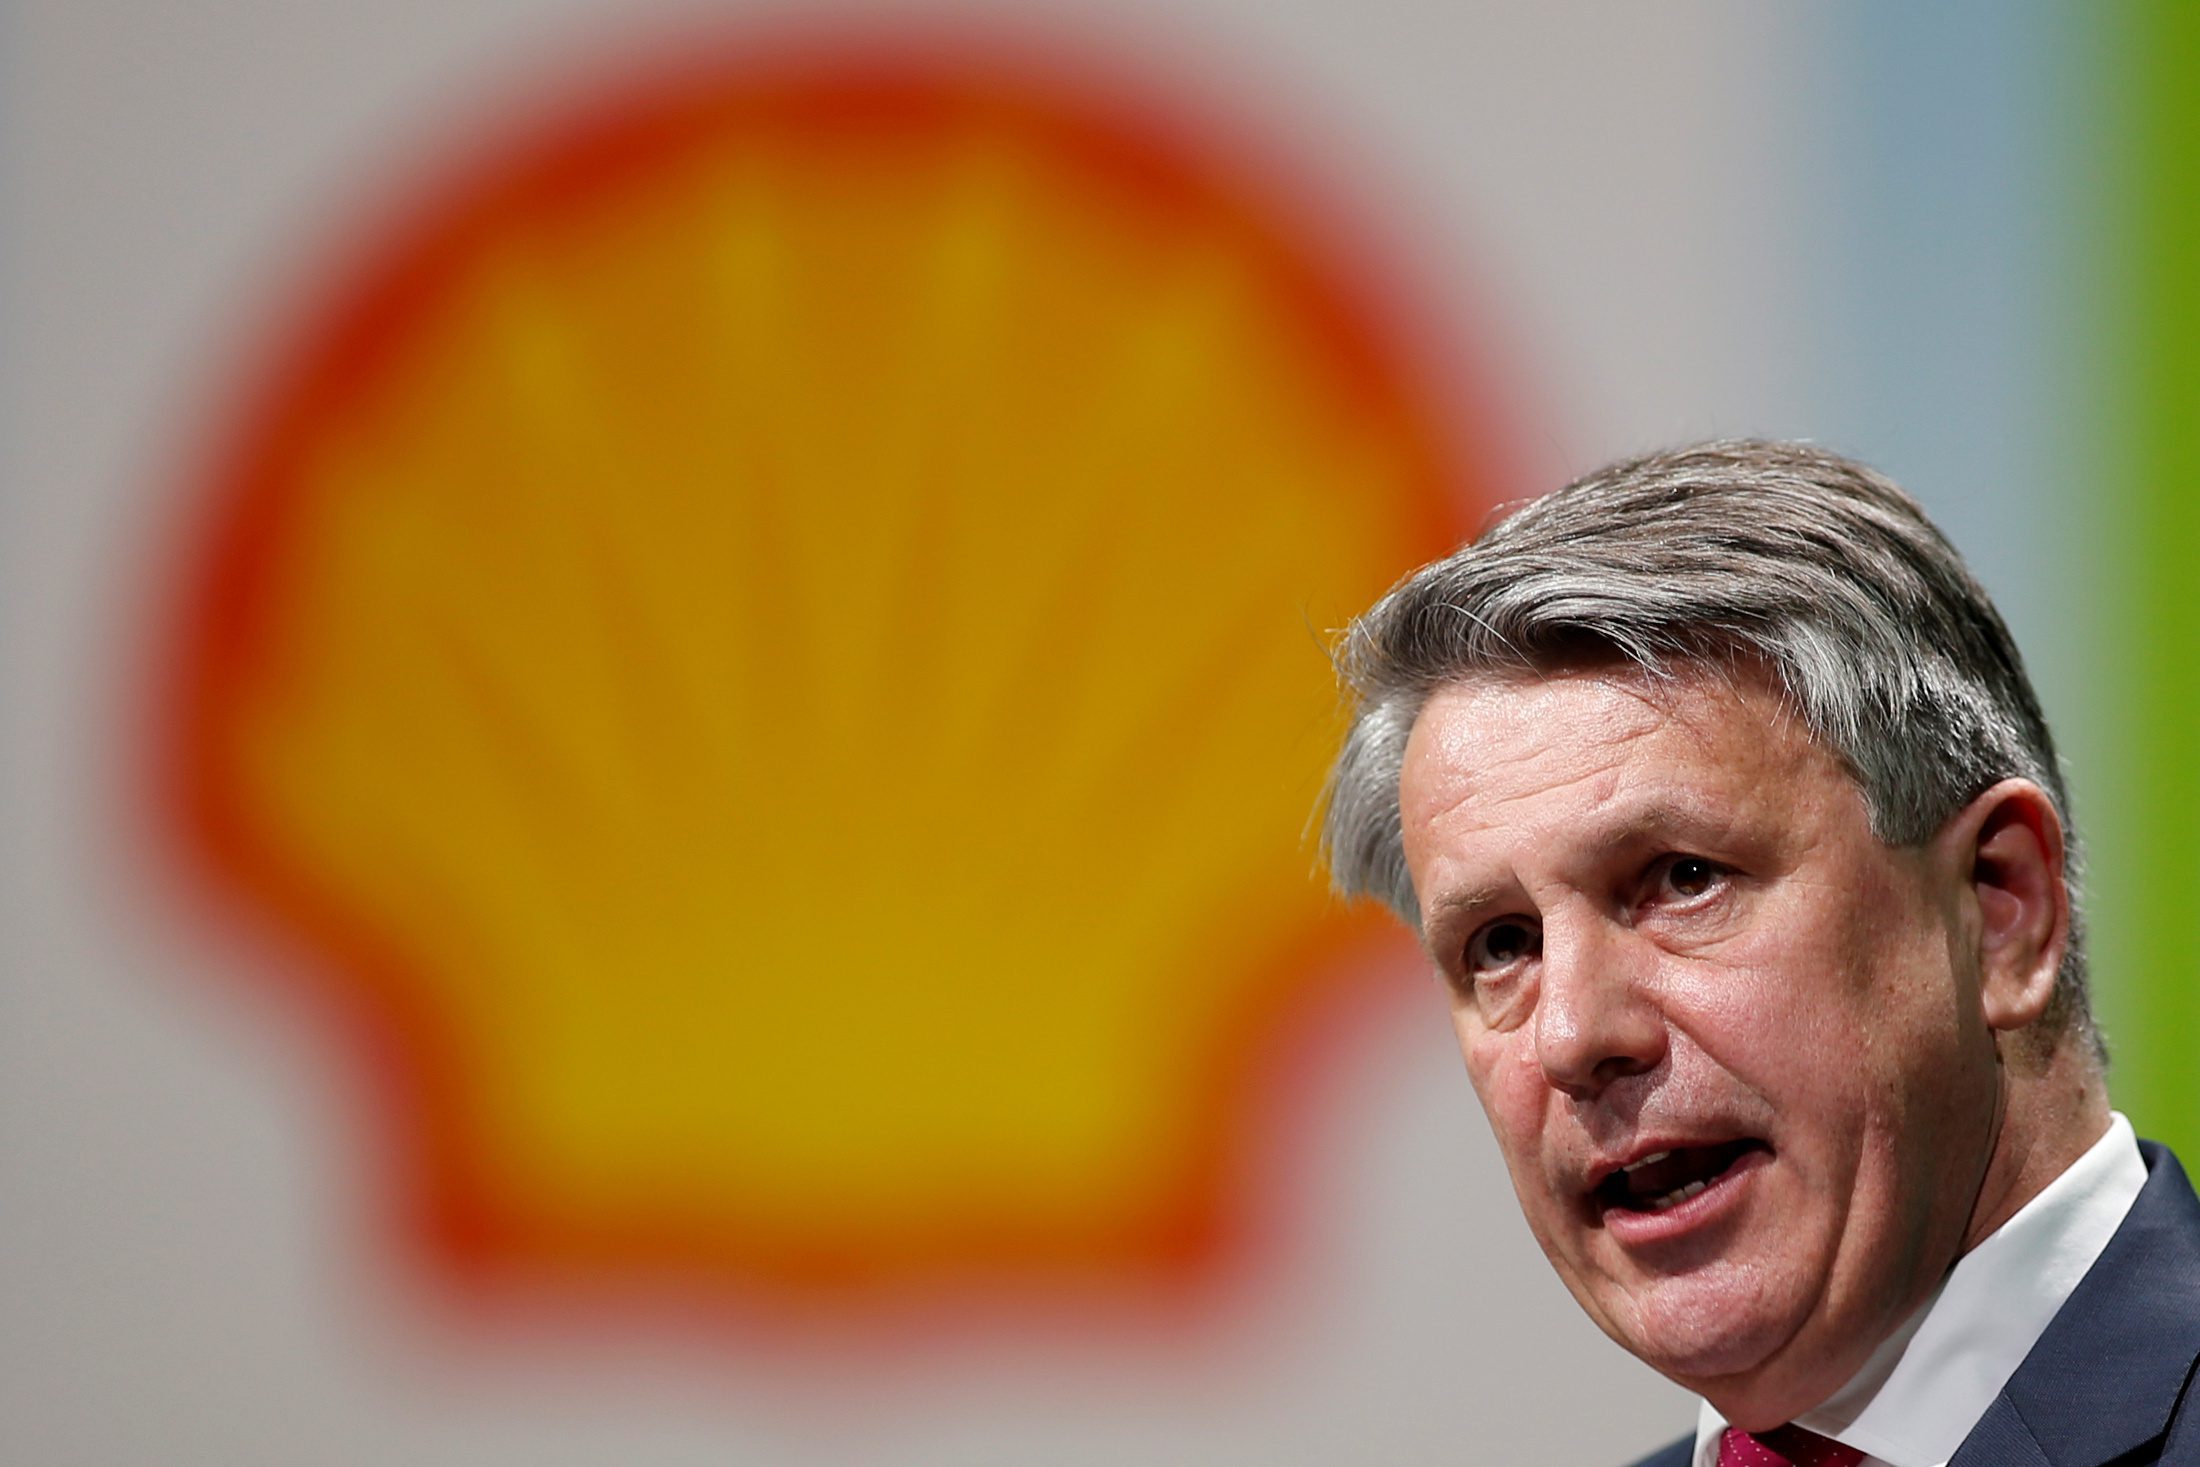 With Oil Past Peak, Shell Sharpens 2050 Zero Emissions Goal